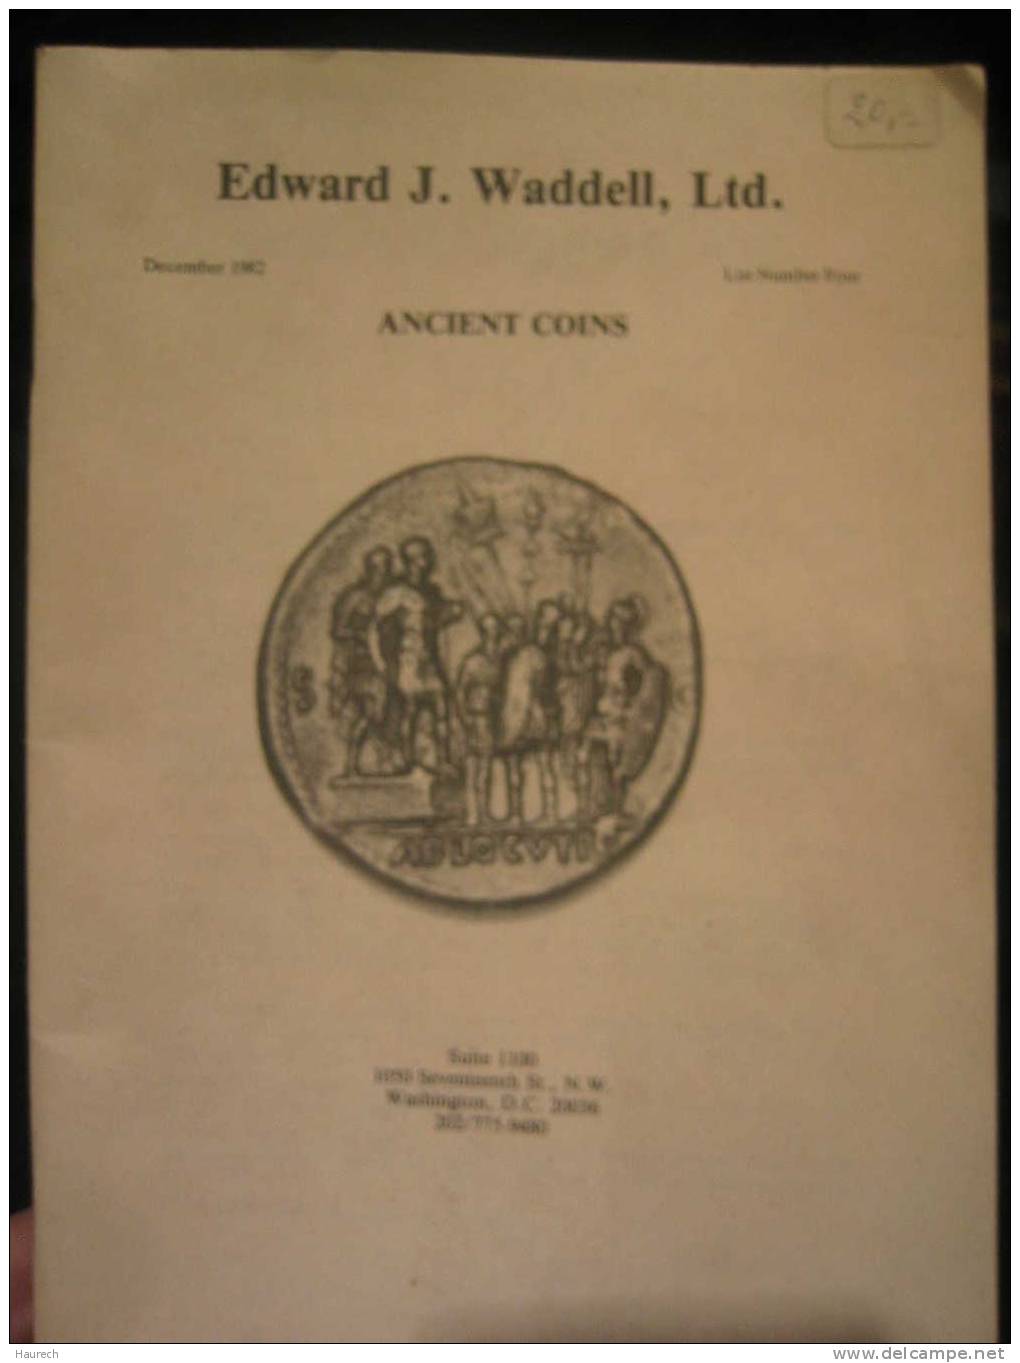 Ancient Coins, Edward J. Waddell, Décembre 1982 - Libros & Software